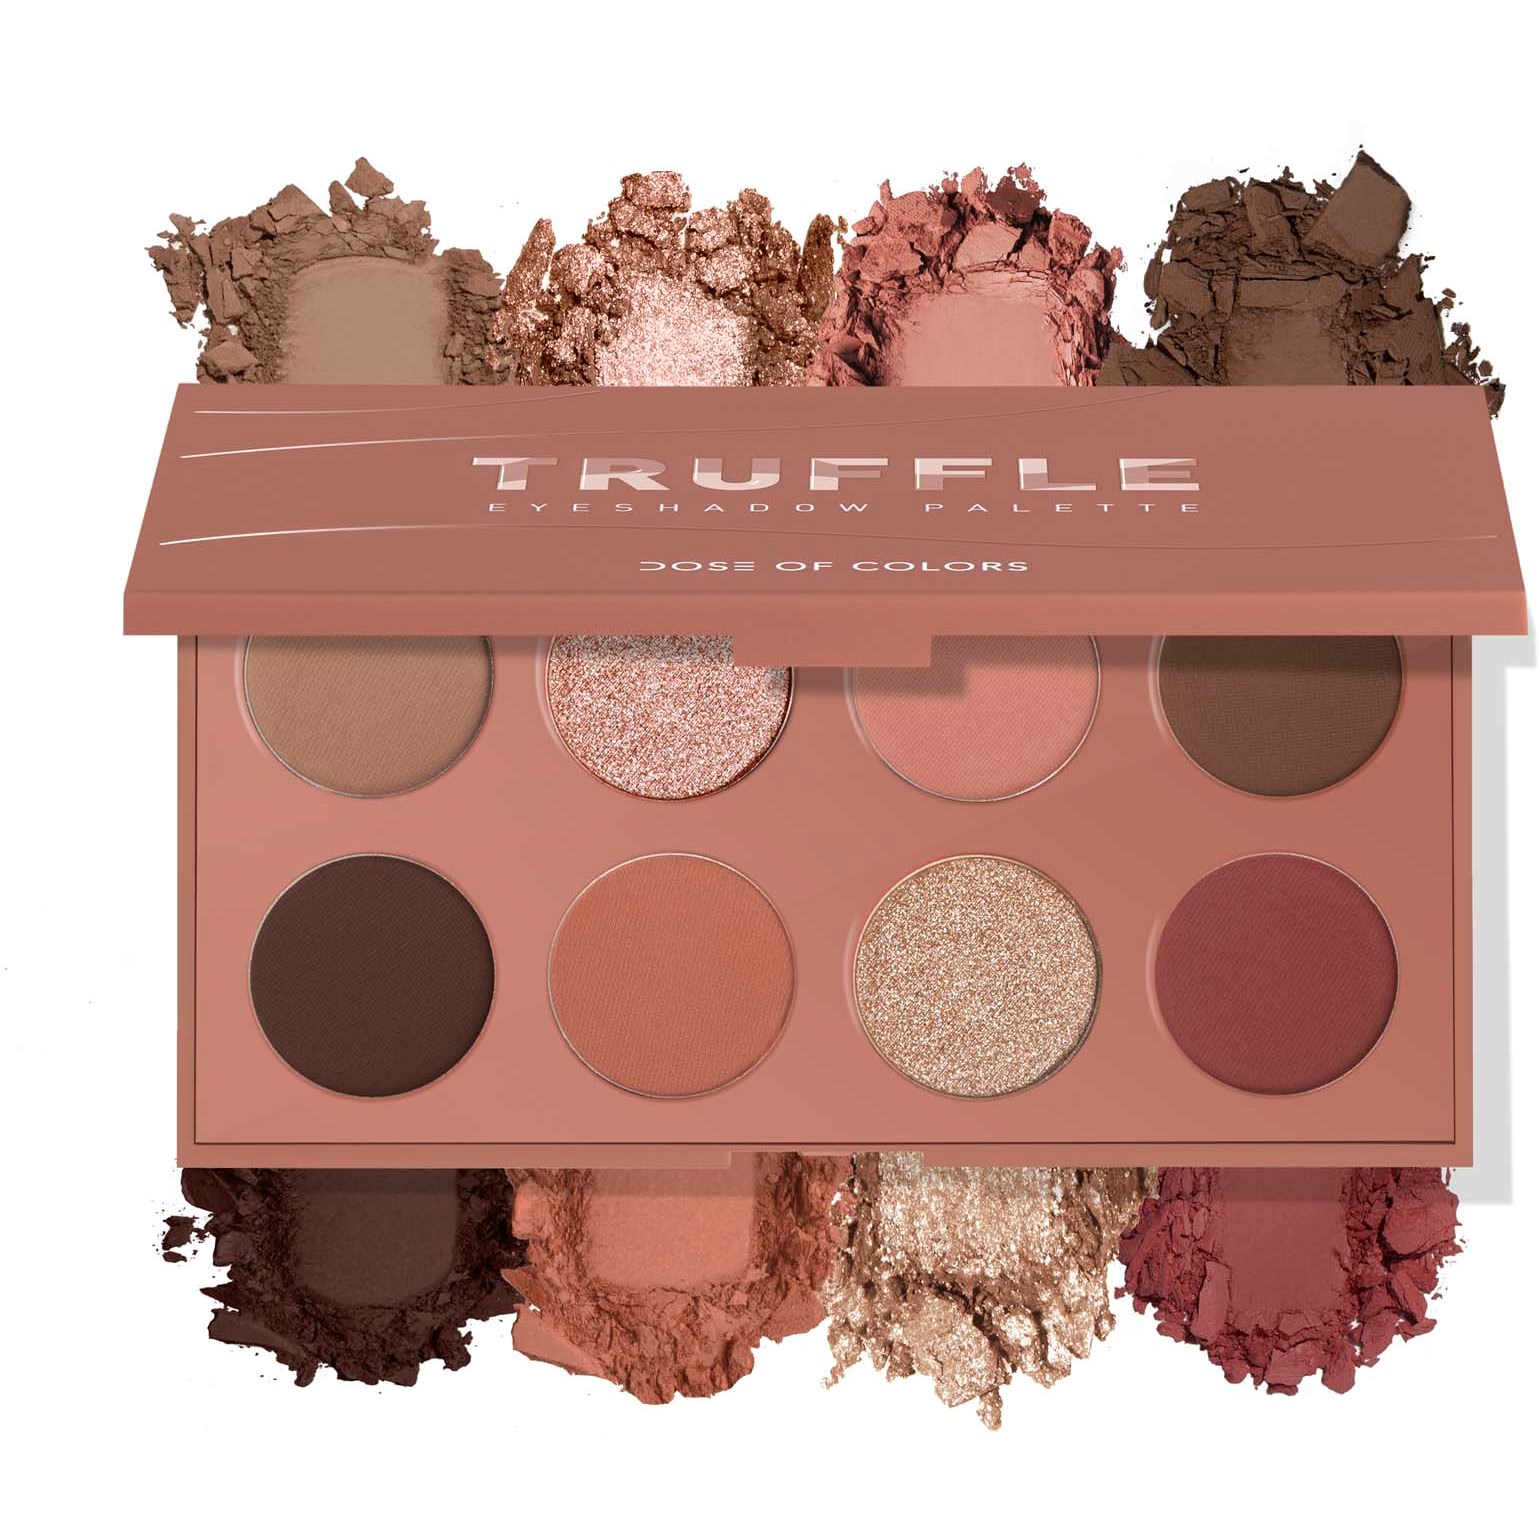 Dose of Colors Truffle Eyeshadow Palette